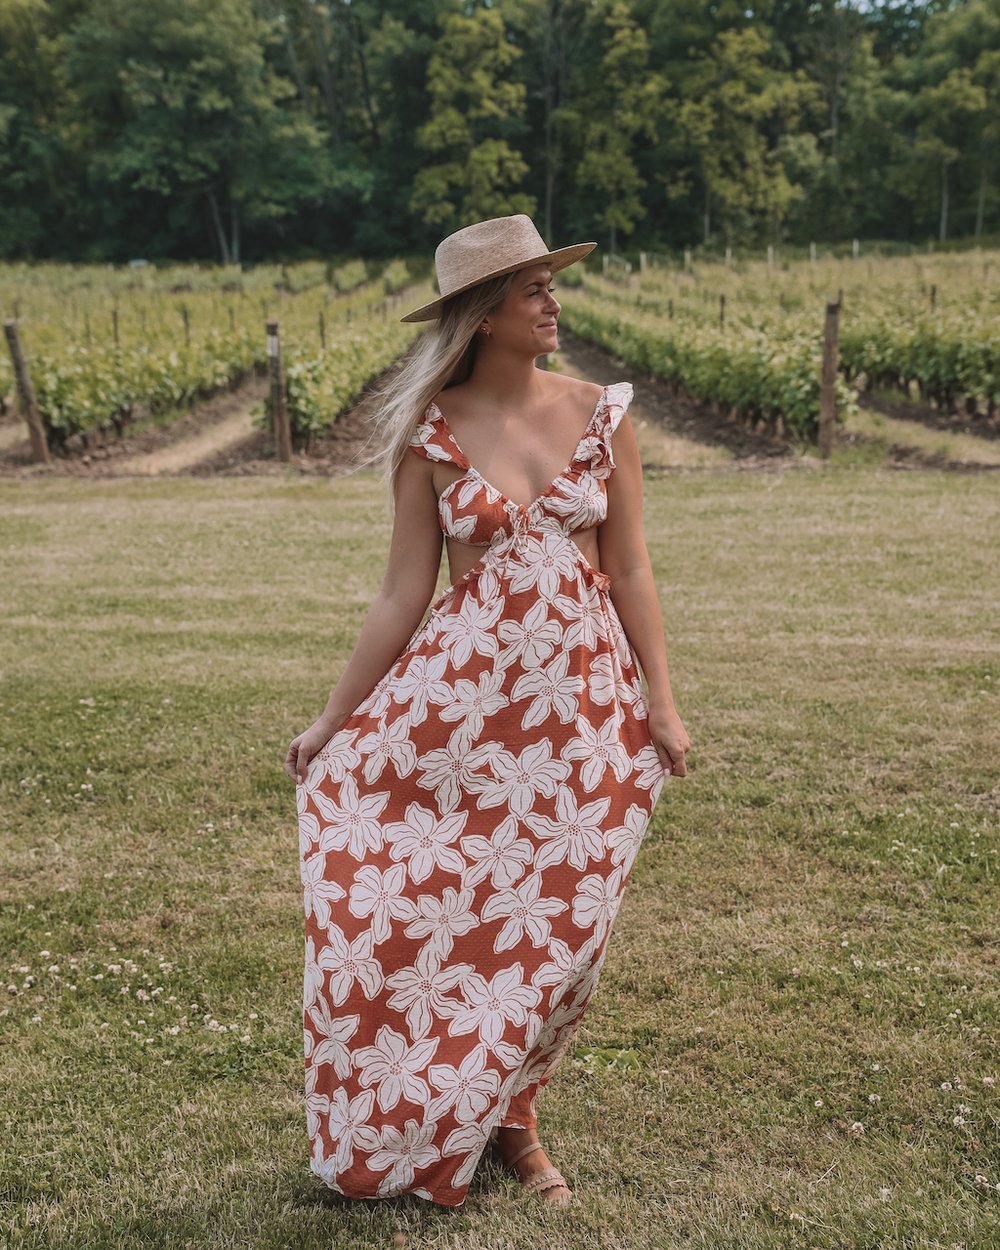 Posing in the vines - Château des Charmes - Niagara-On-The-Lake - Ontario - Canada